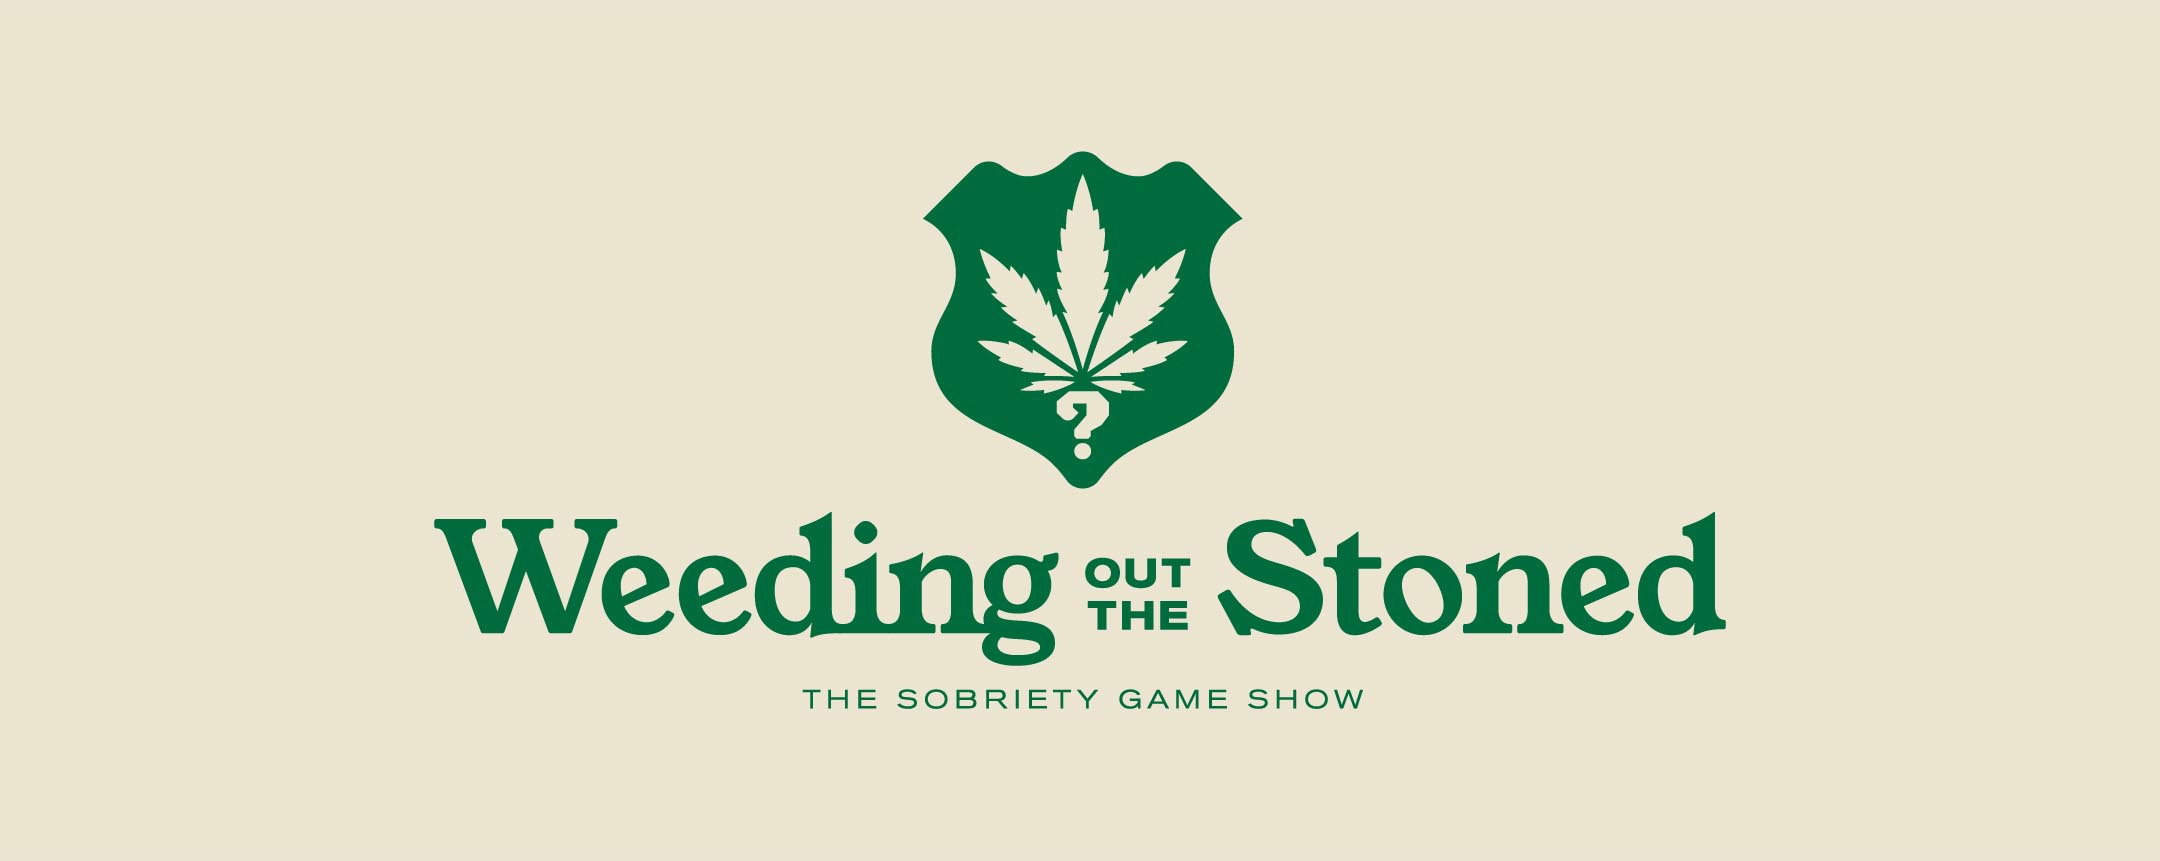 image of weeding out the stoned logo